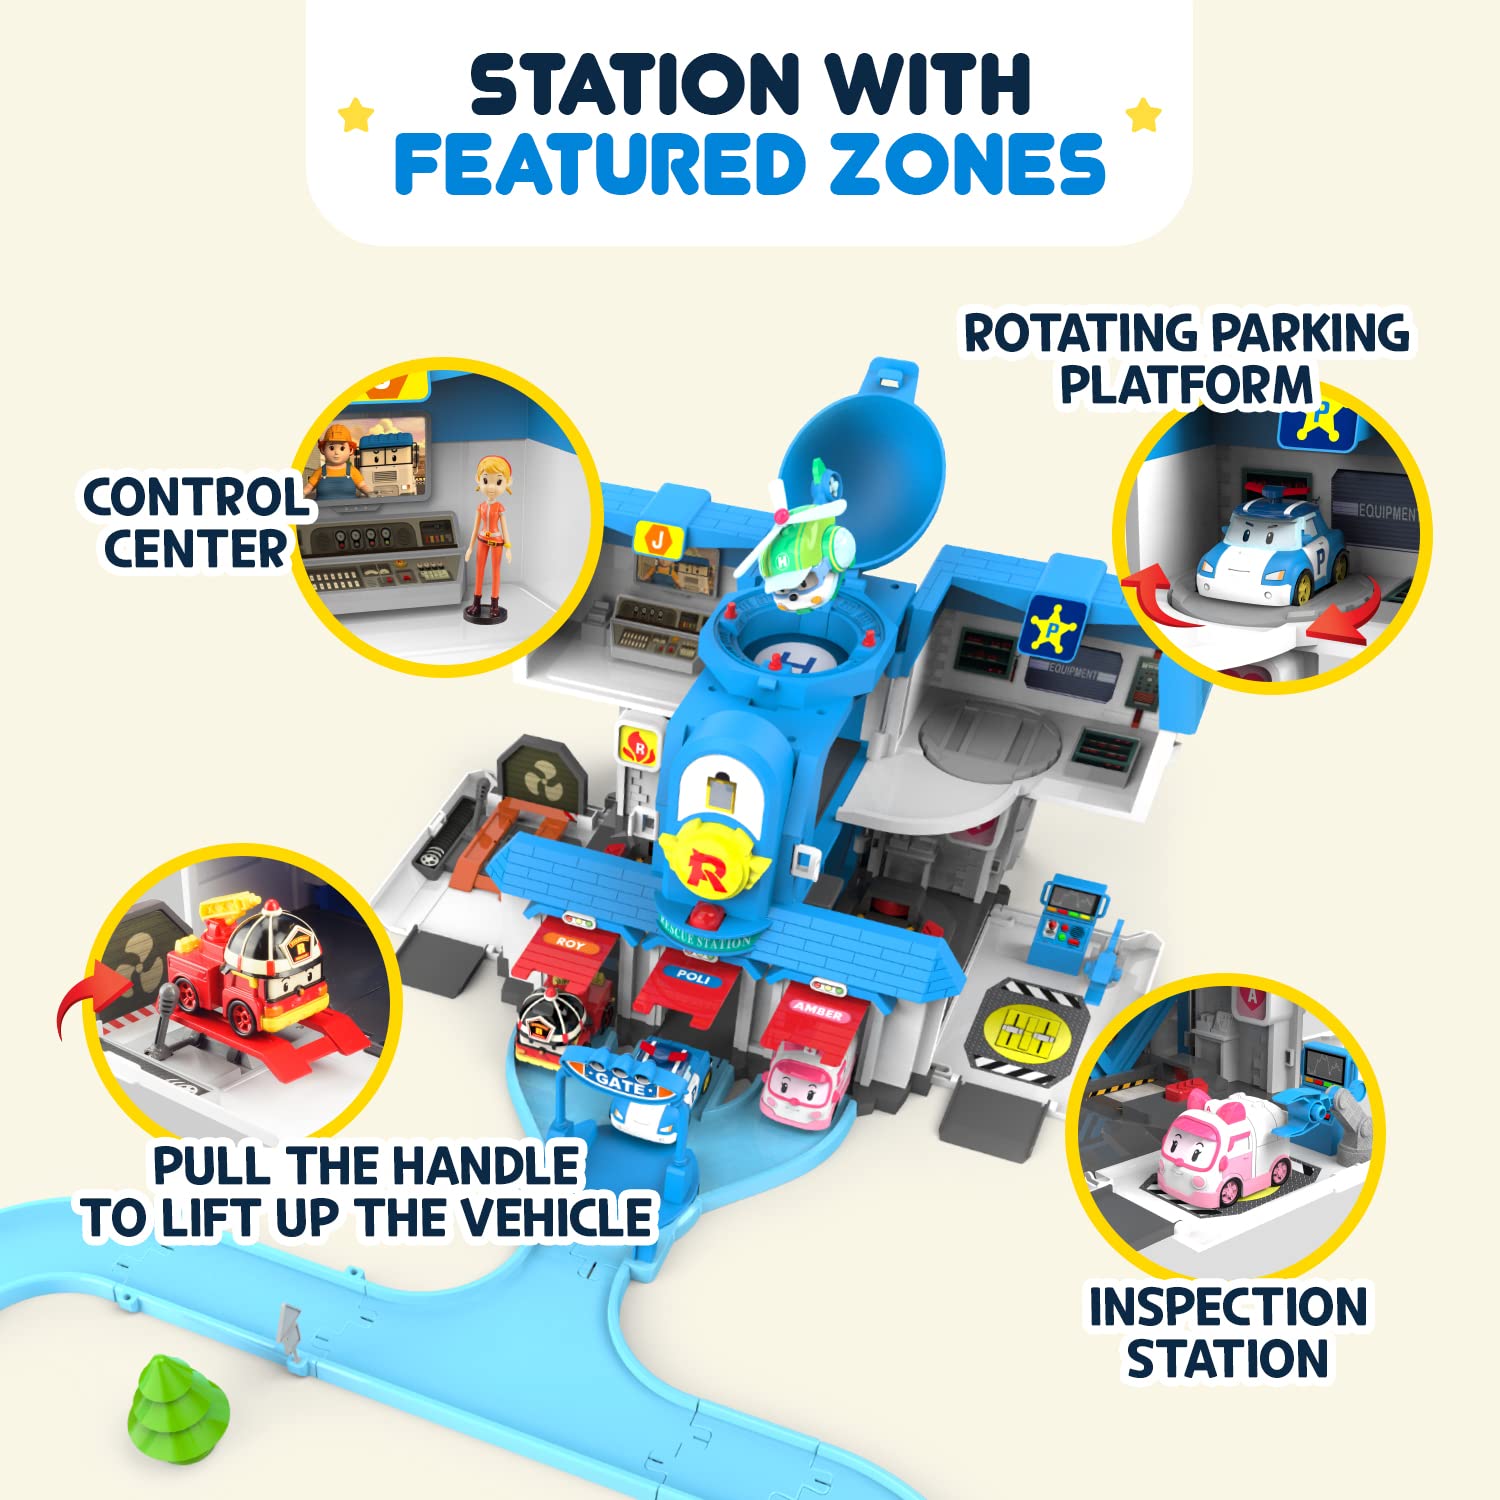 Robocar Poli Toys Exclusive, Transforming Headquarter Station Playset, Rescue Center Race Track Set (with Jin Figure) for Diecast Metal Toy Cars